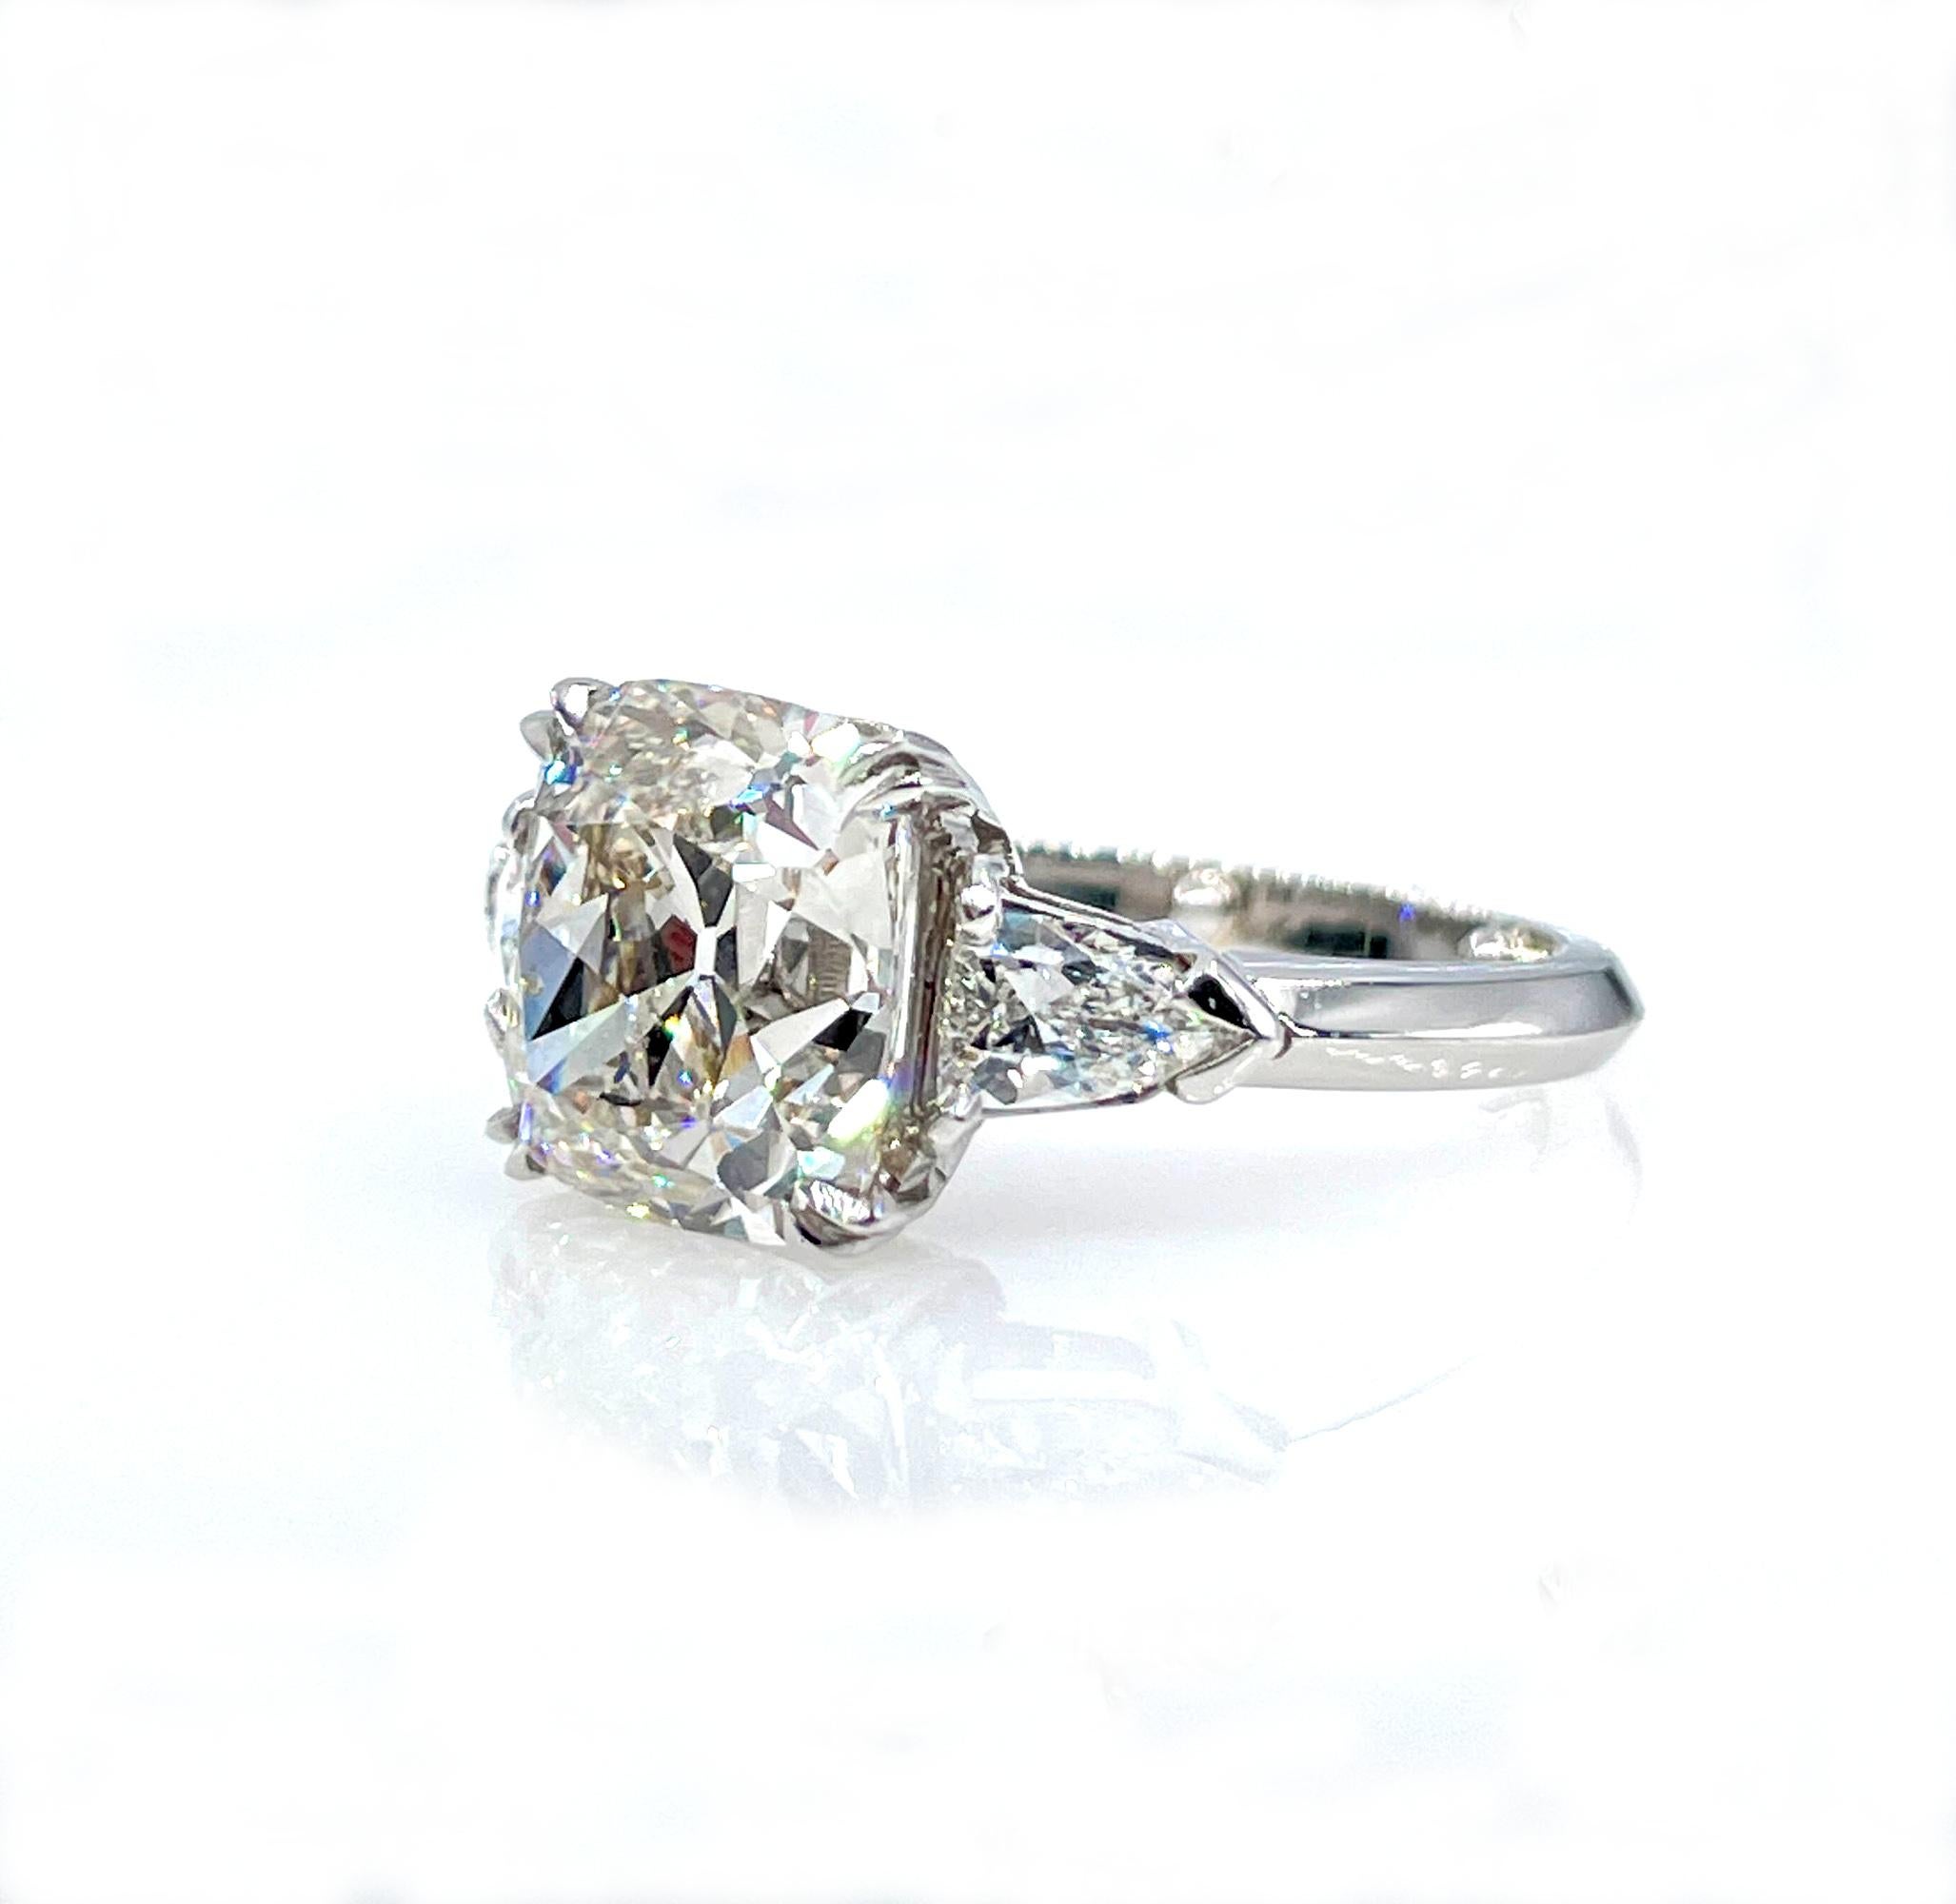 Incredible opportunity to own a Huge 100% NATURAL, NONE-treated diamond ring at the great price.
If you are looking for a SUPER Impressive Wedding Diamond Engagement Ring, it is your ring!

A large 4.34CT 100% Natural Antique Cushion Cut Center